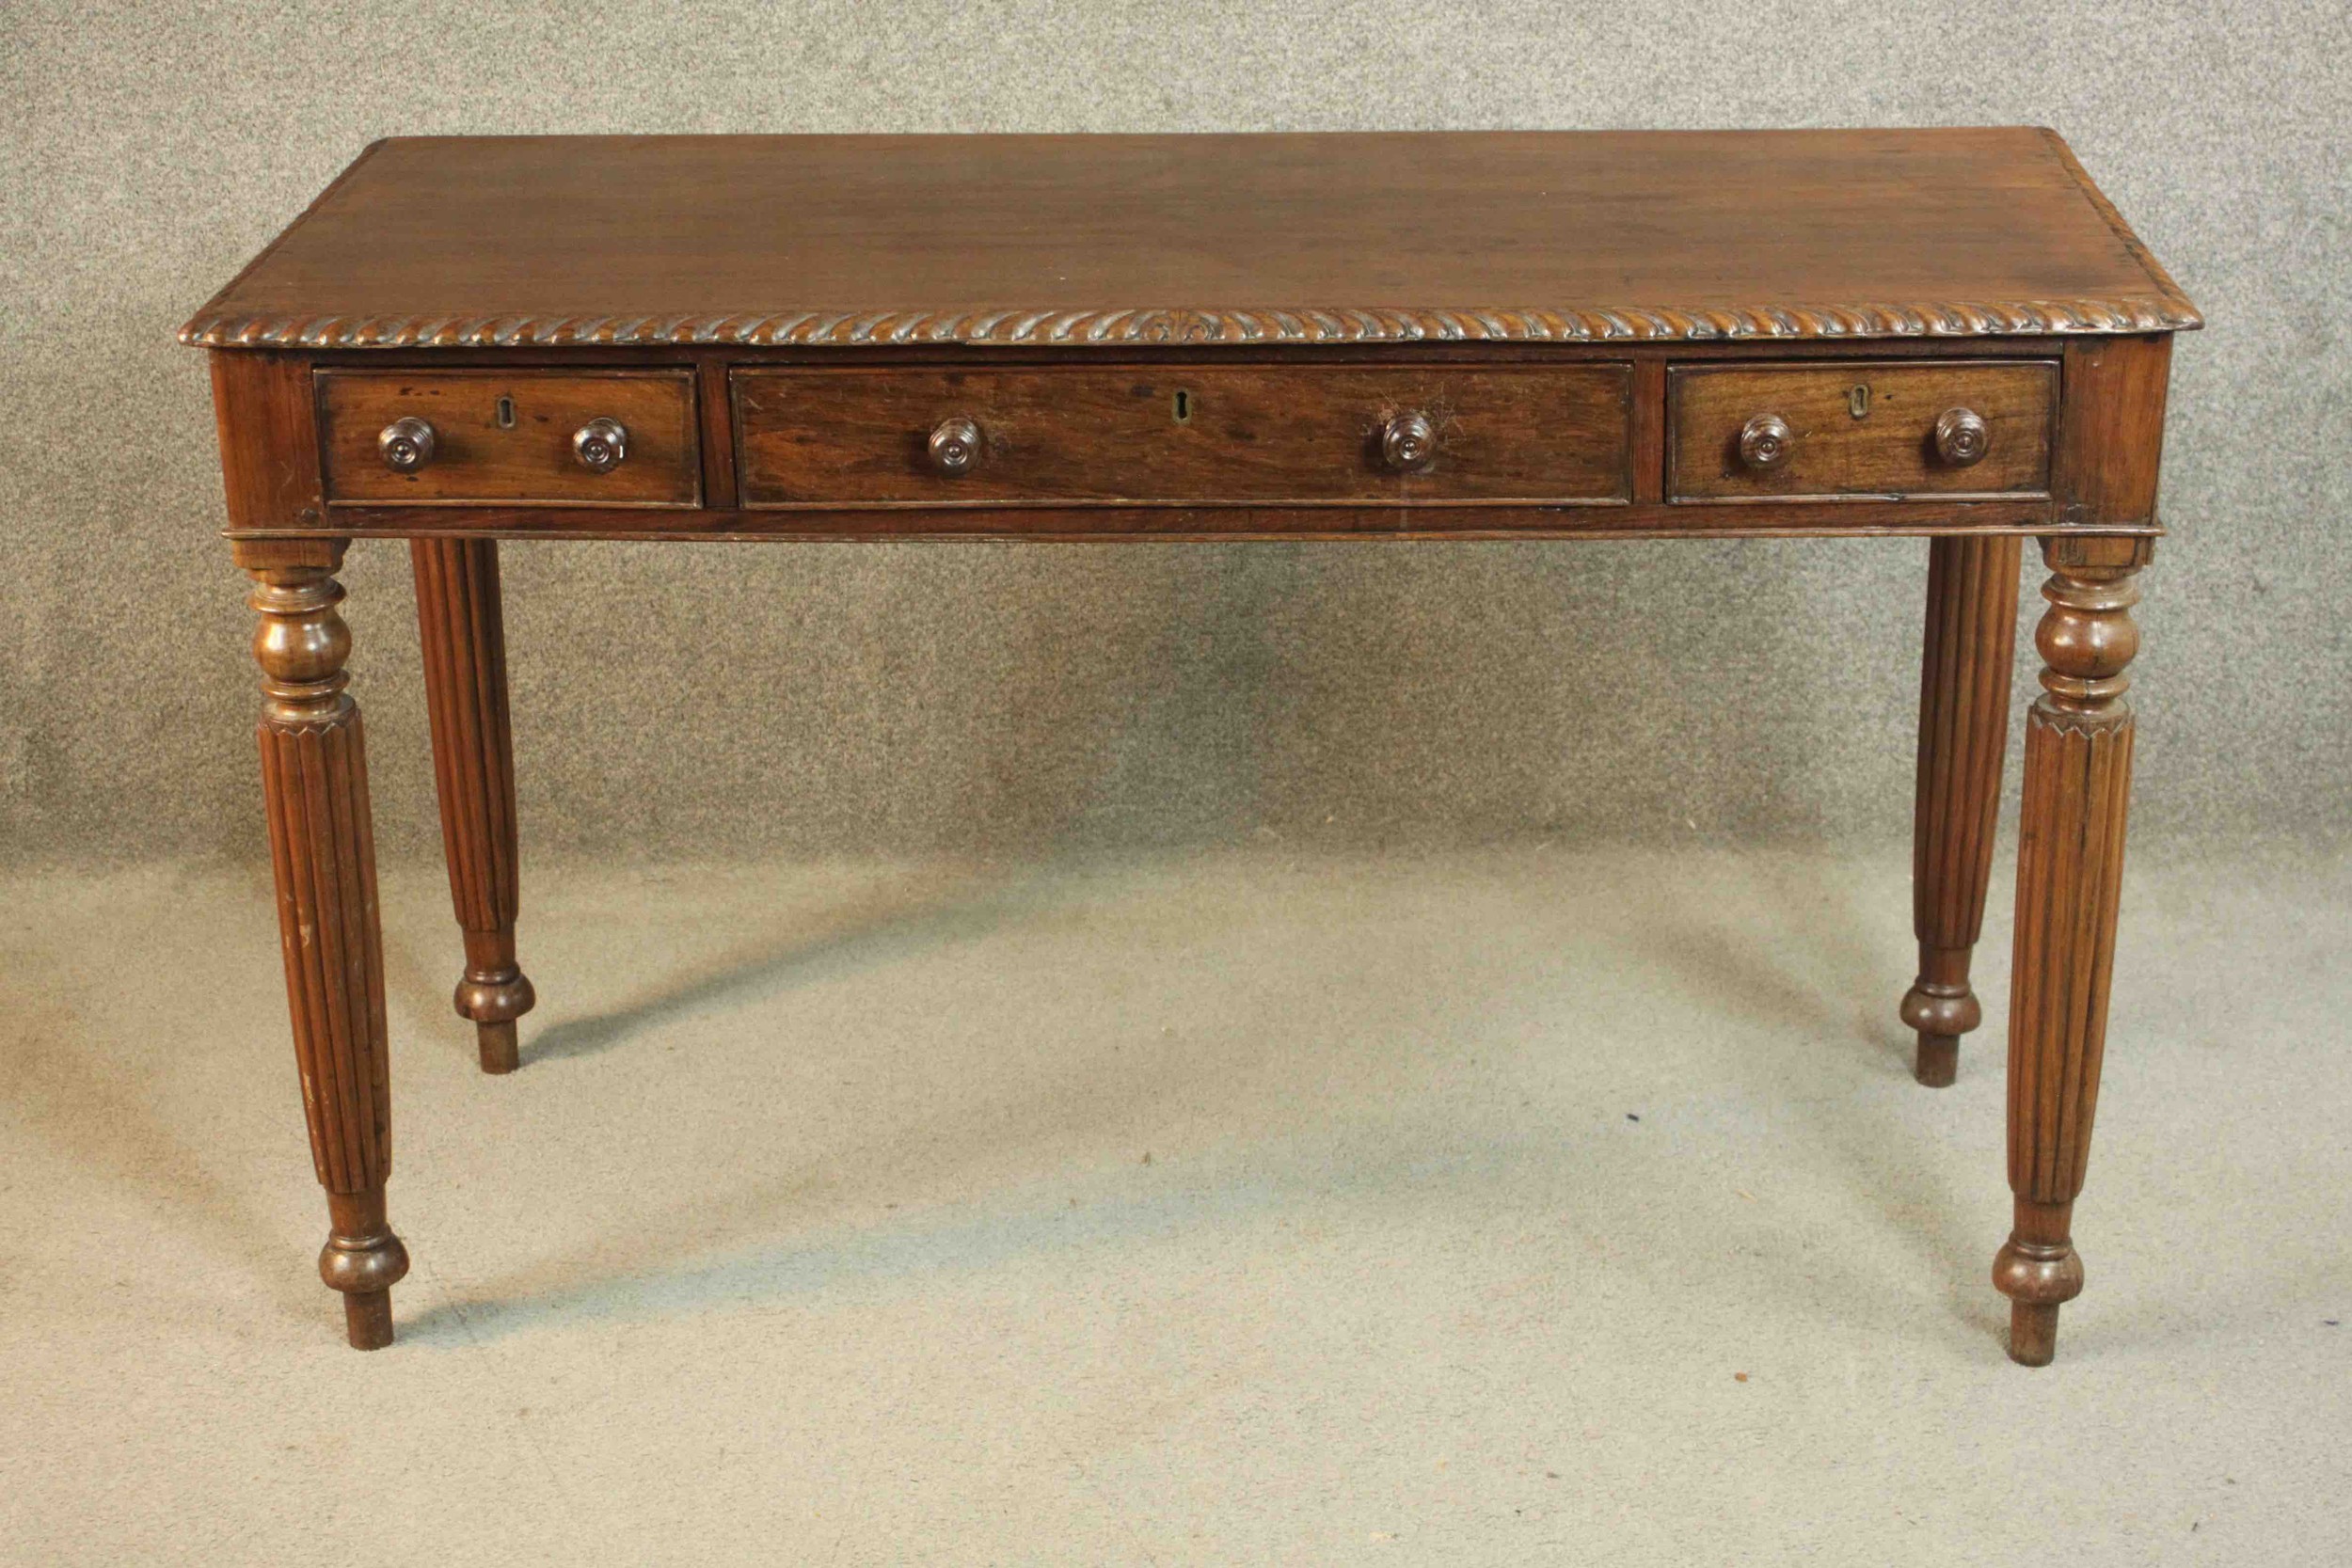 A George III Anglo-Indian side table, the rectangular top with a gadrooned edge, over three short